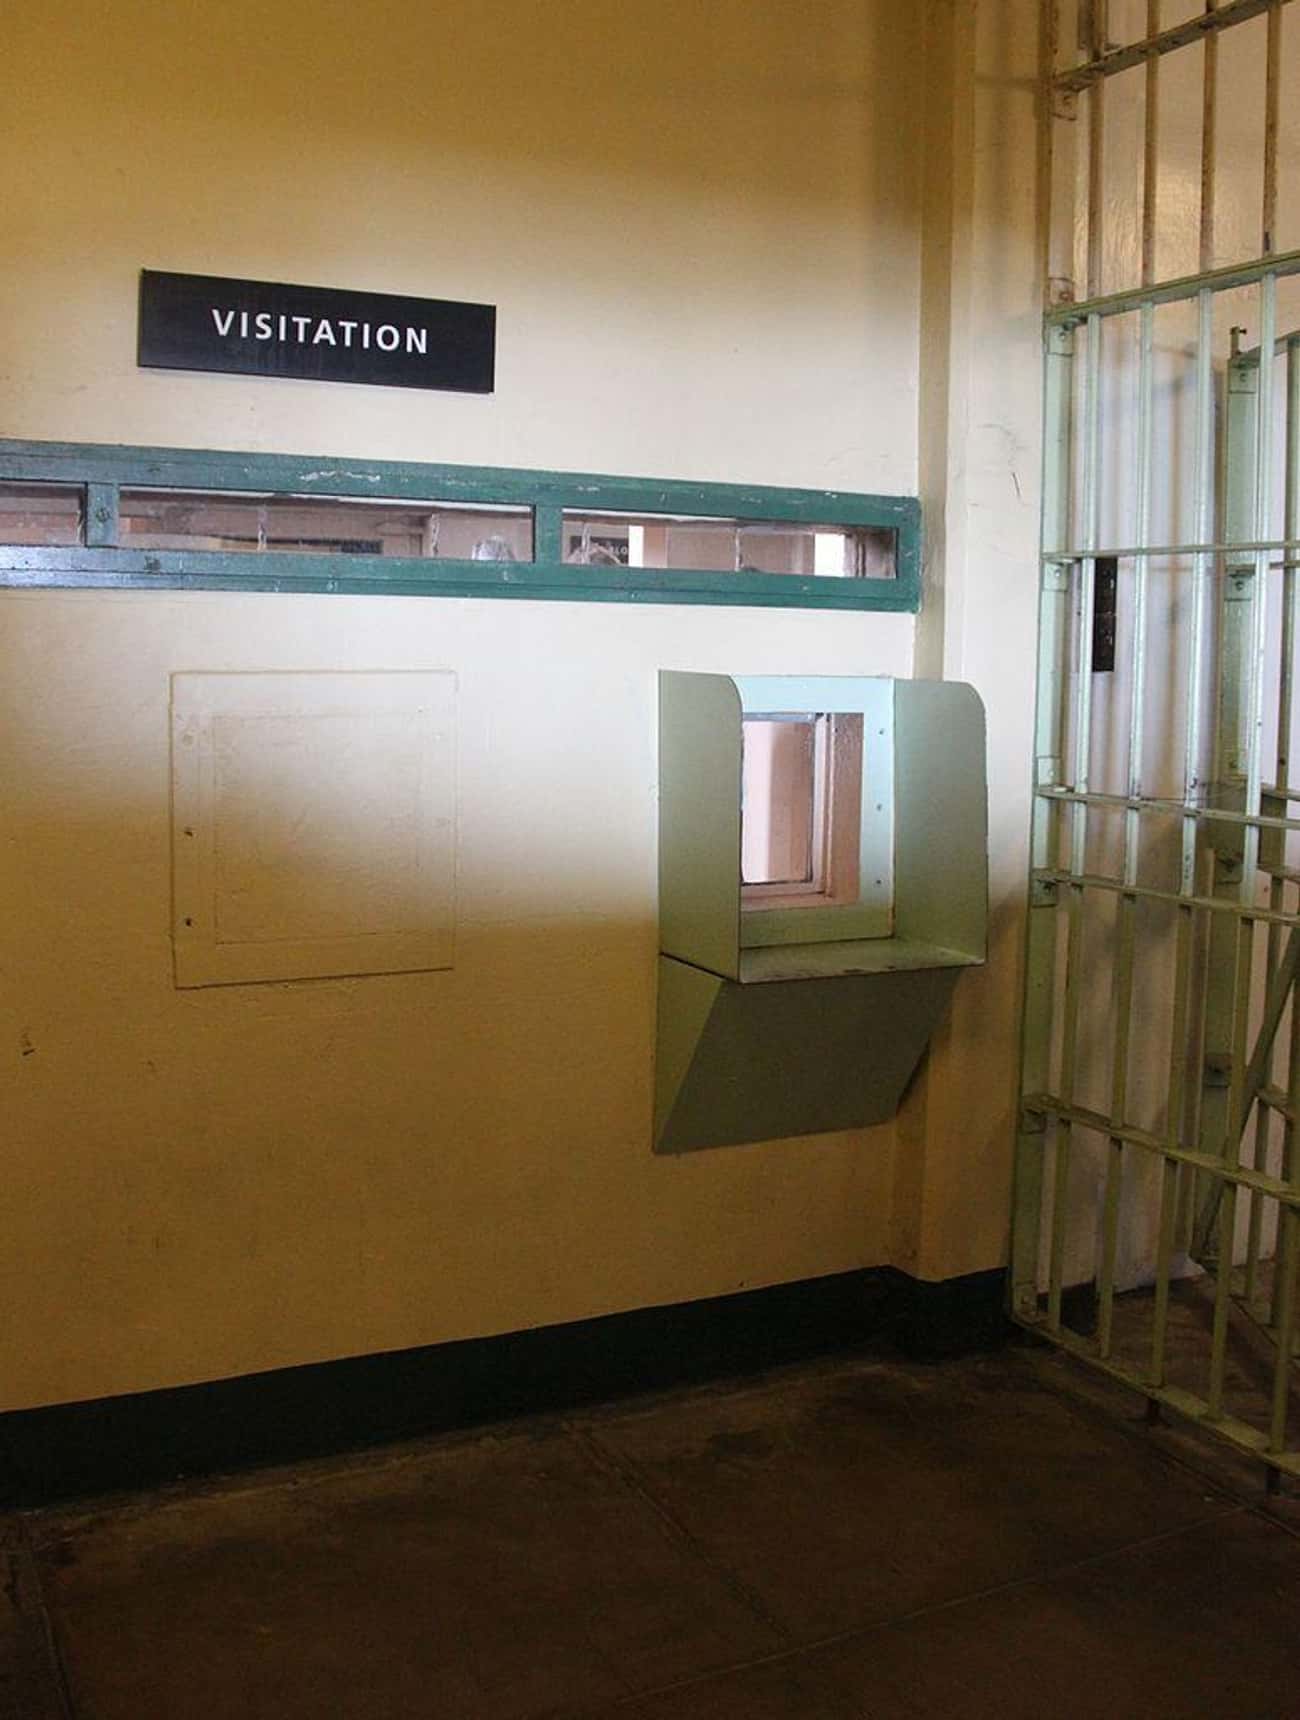 There Were Limitations To How Much Prisoners Could Communicate With The Outside World